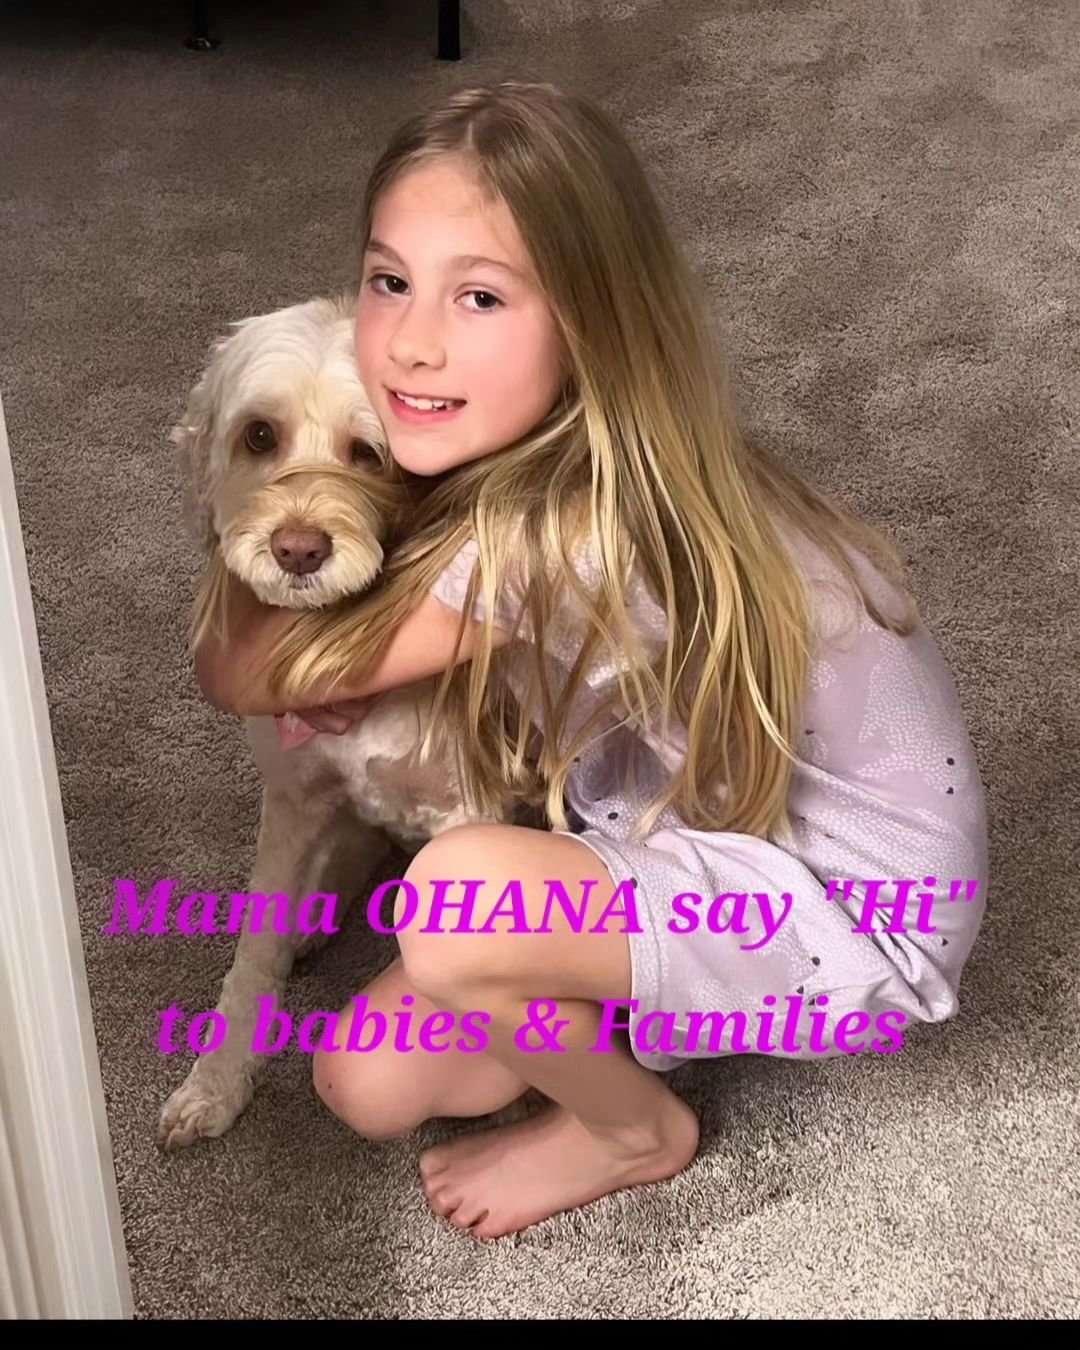 OHANA mama, is loved in retirement by her guardian family of 7 years. She brought much love into this world, 12 puppies at a time! 😳 She sends her love to all of them. 💌 A Beautiful Friendship! 

#BFF #australianlabradoodle #instapuppy #instadoodle